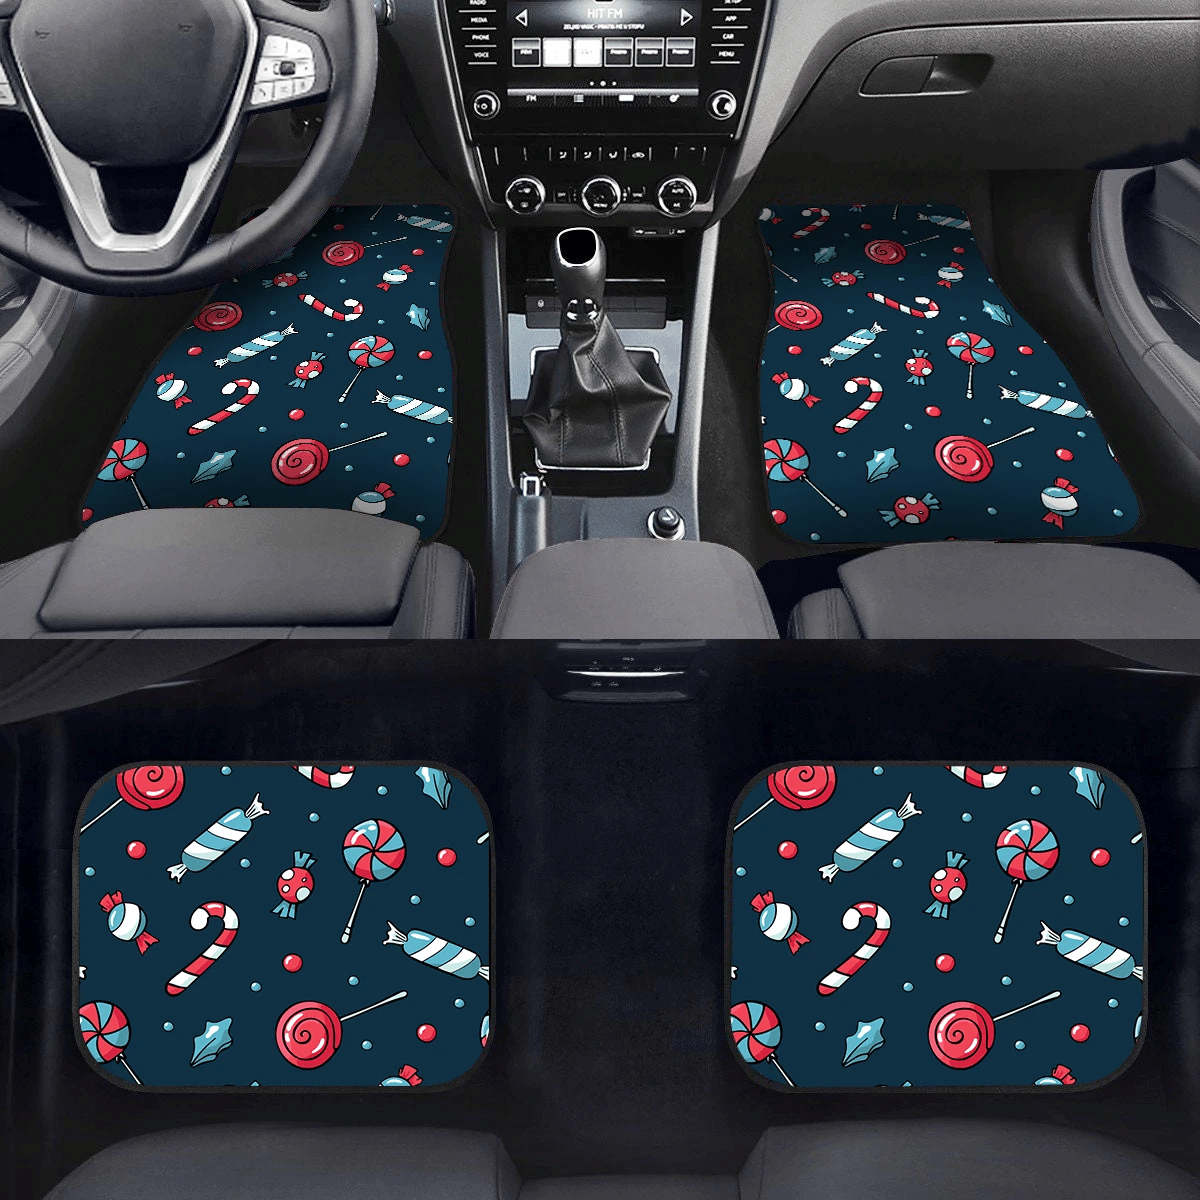 Blue And Red Cute Candy Cane And Snowball Car Mats Car Floor Mats